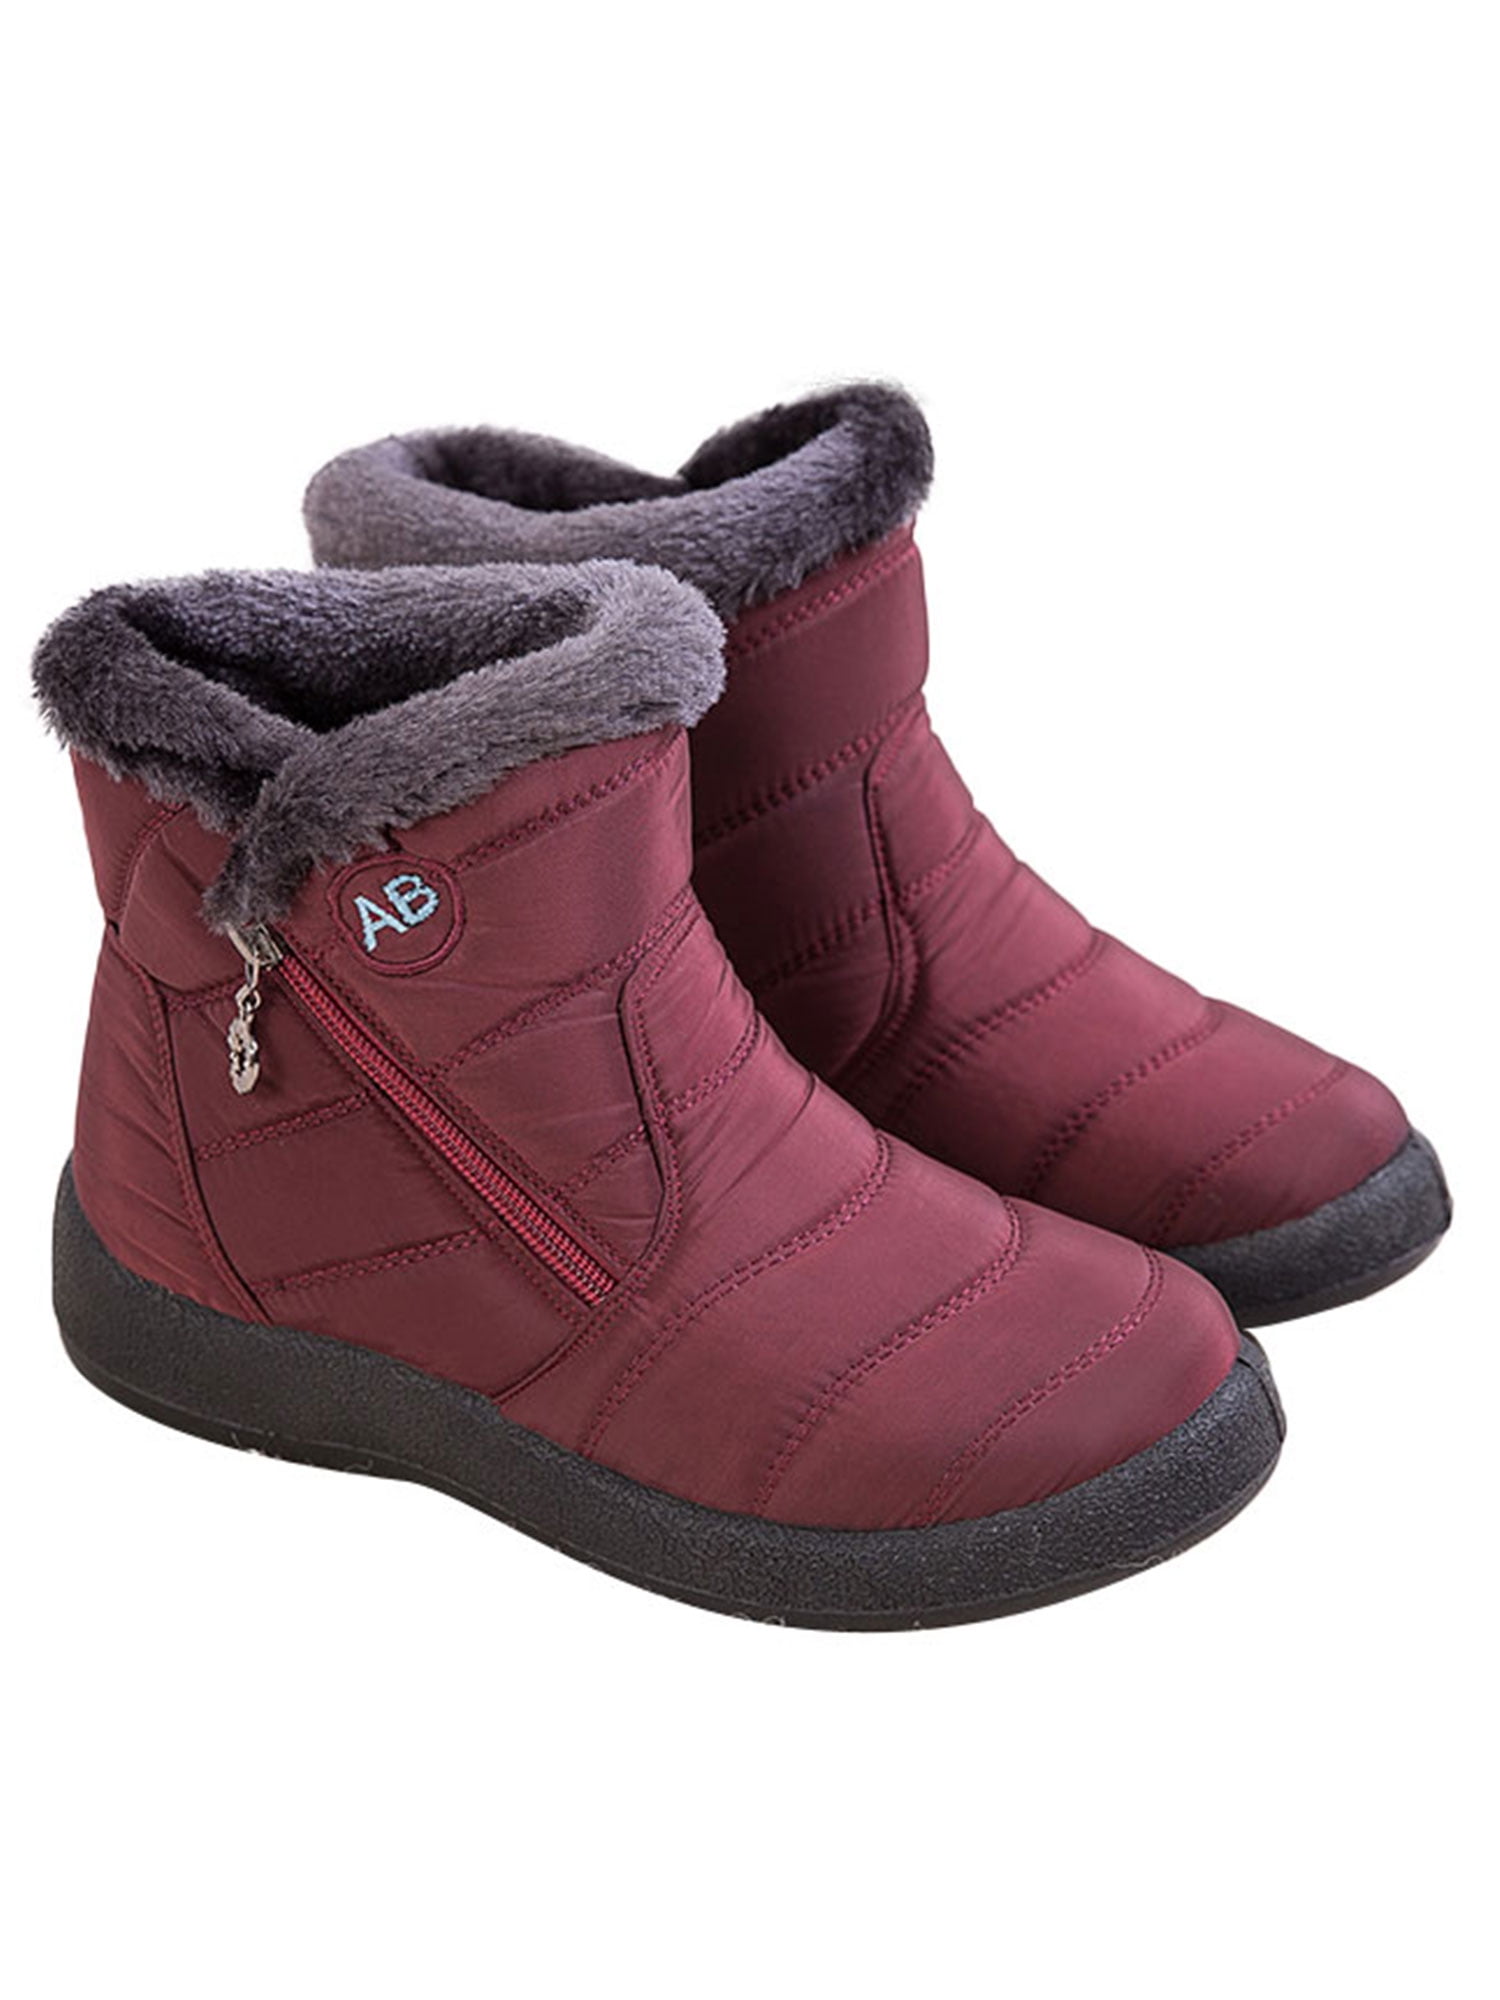 Womens Fur Lined Snow Ankle Boots Ladies Winter Warm Outdoor hiking boots Size 